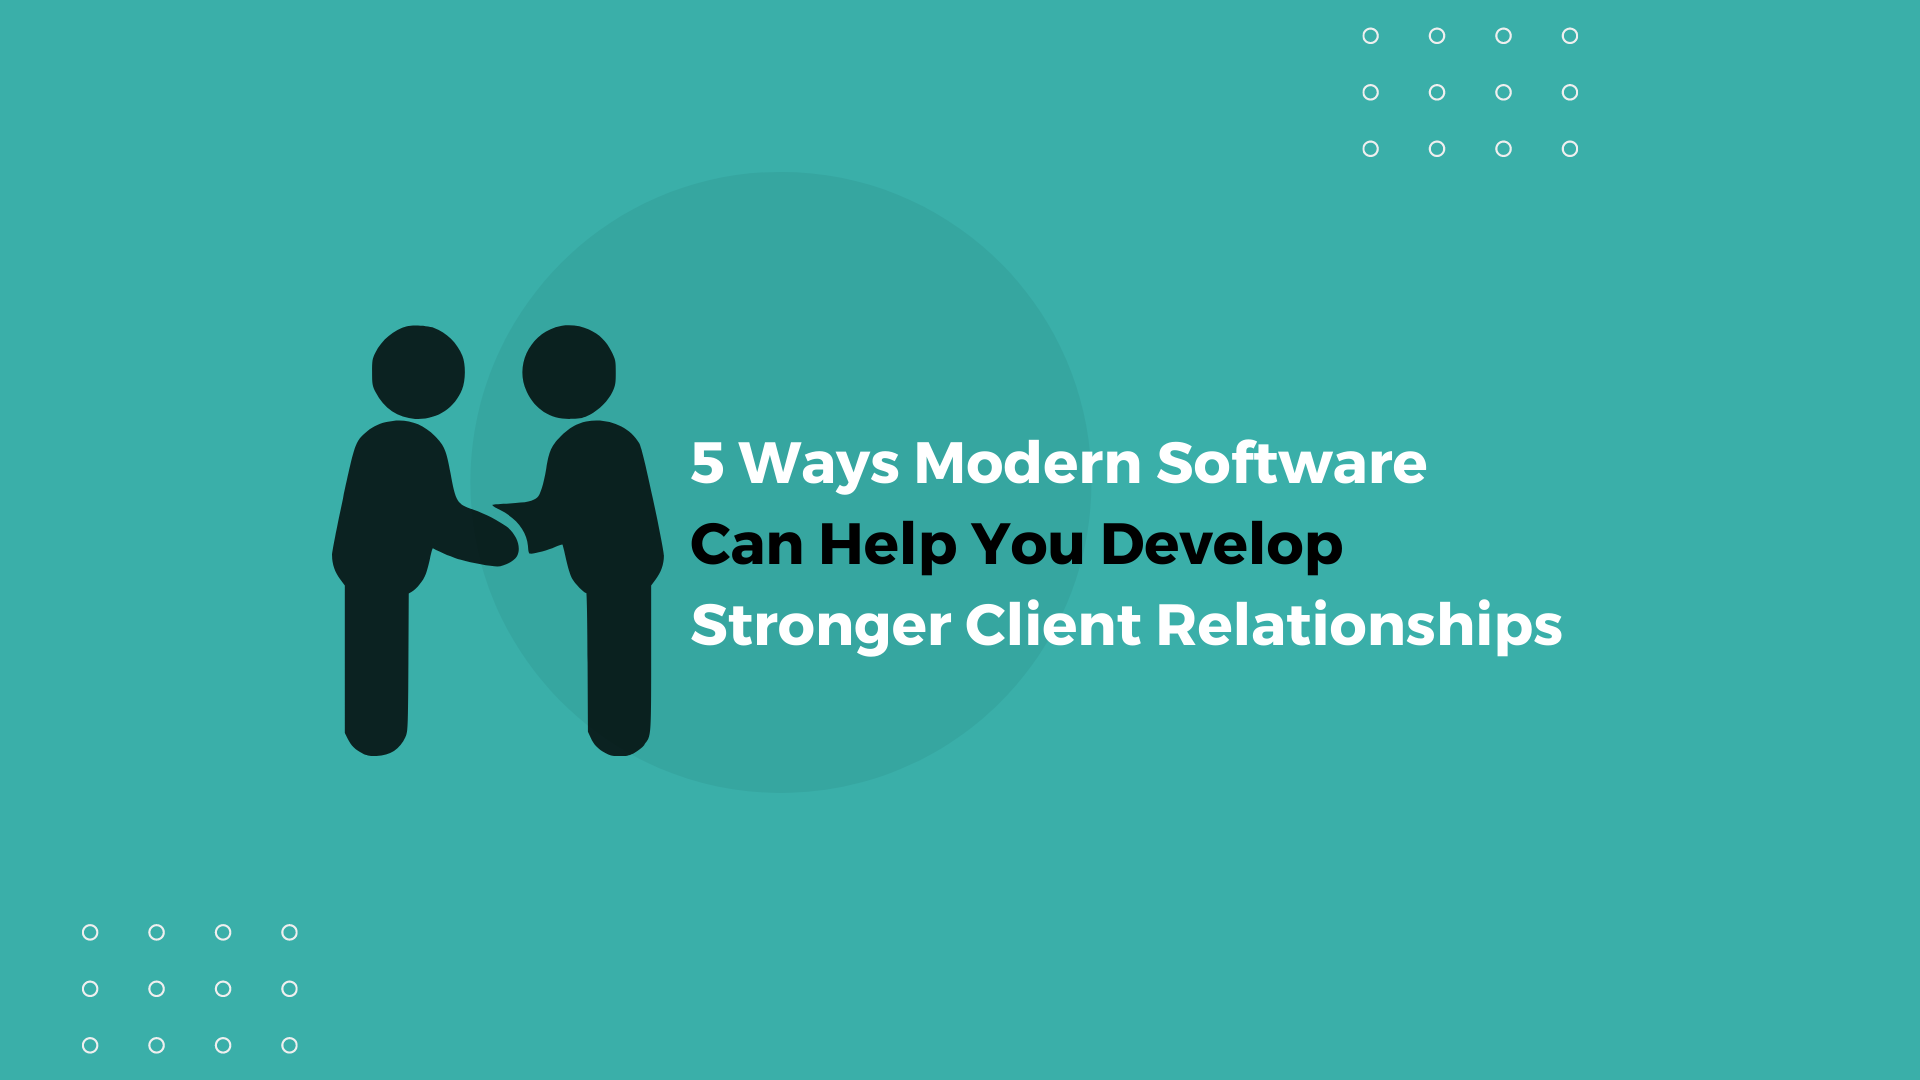 5 Ways Modern Software Can Help You Develop Stronger Client Relationships